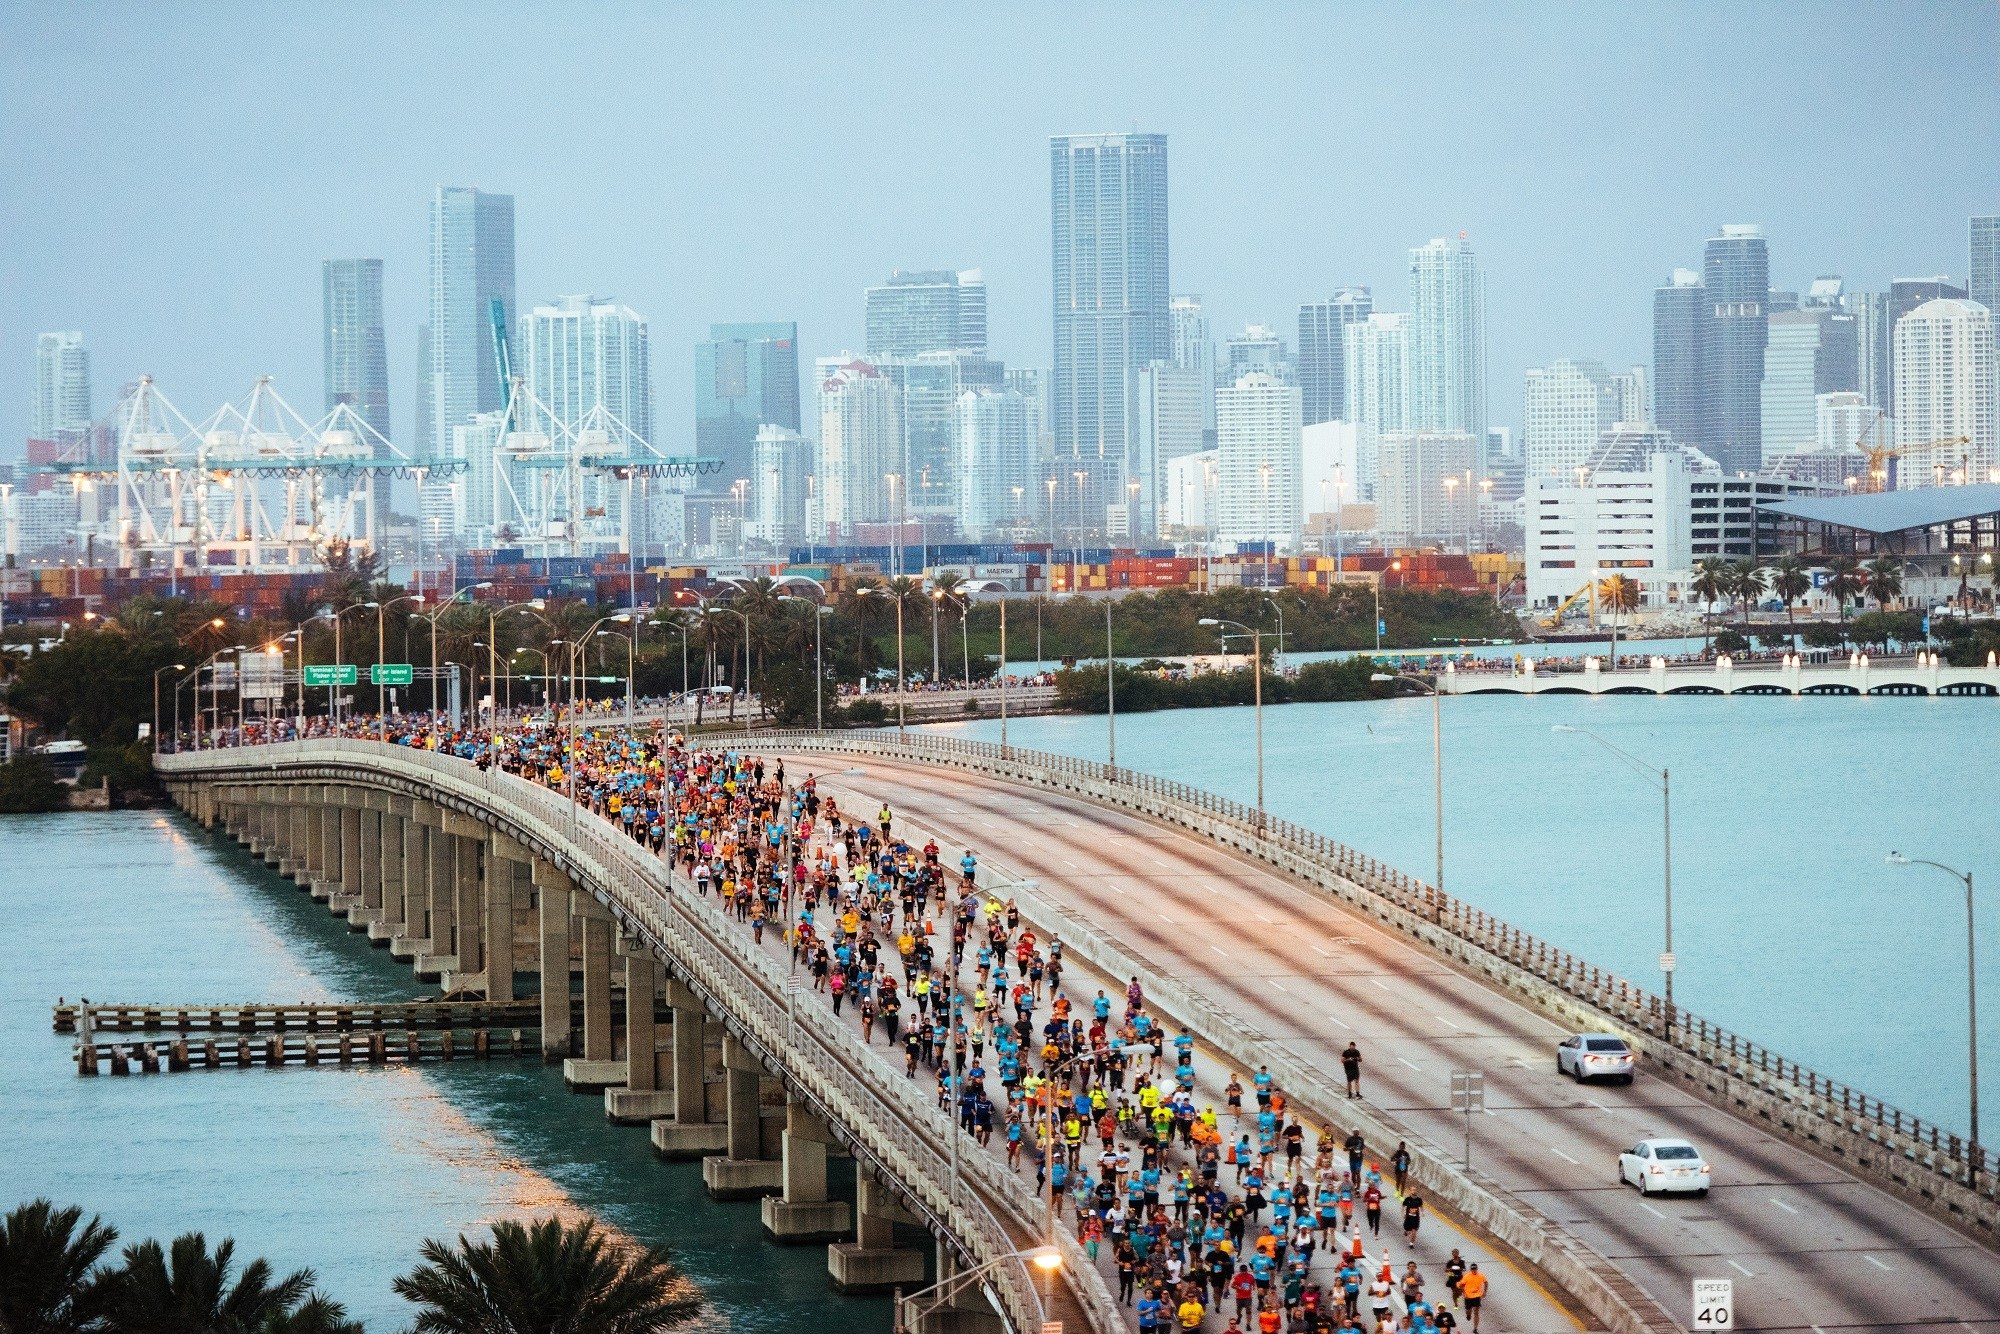 The Miami Marathon Is Here, So Your Weekend Plans No Longer Involve Driving